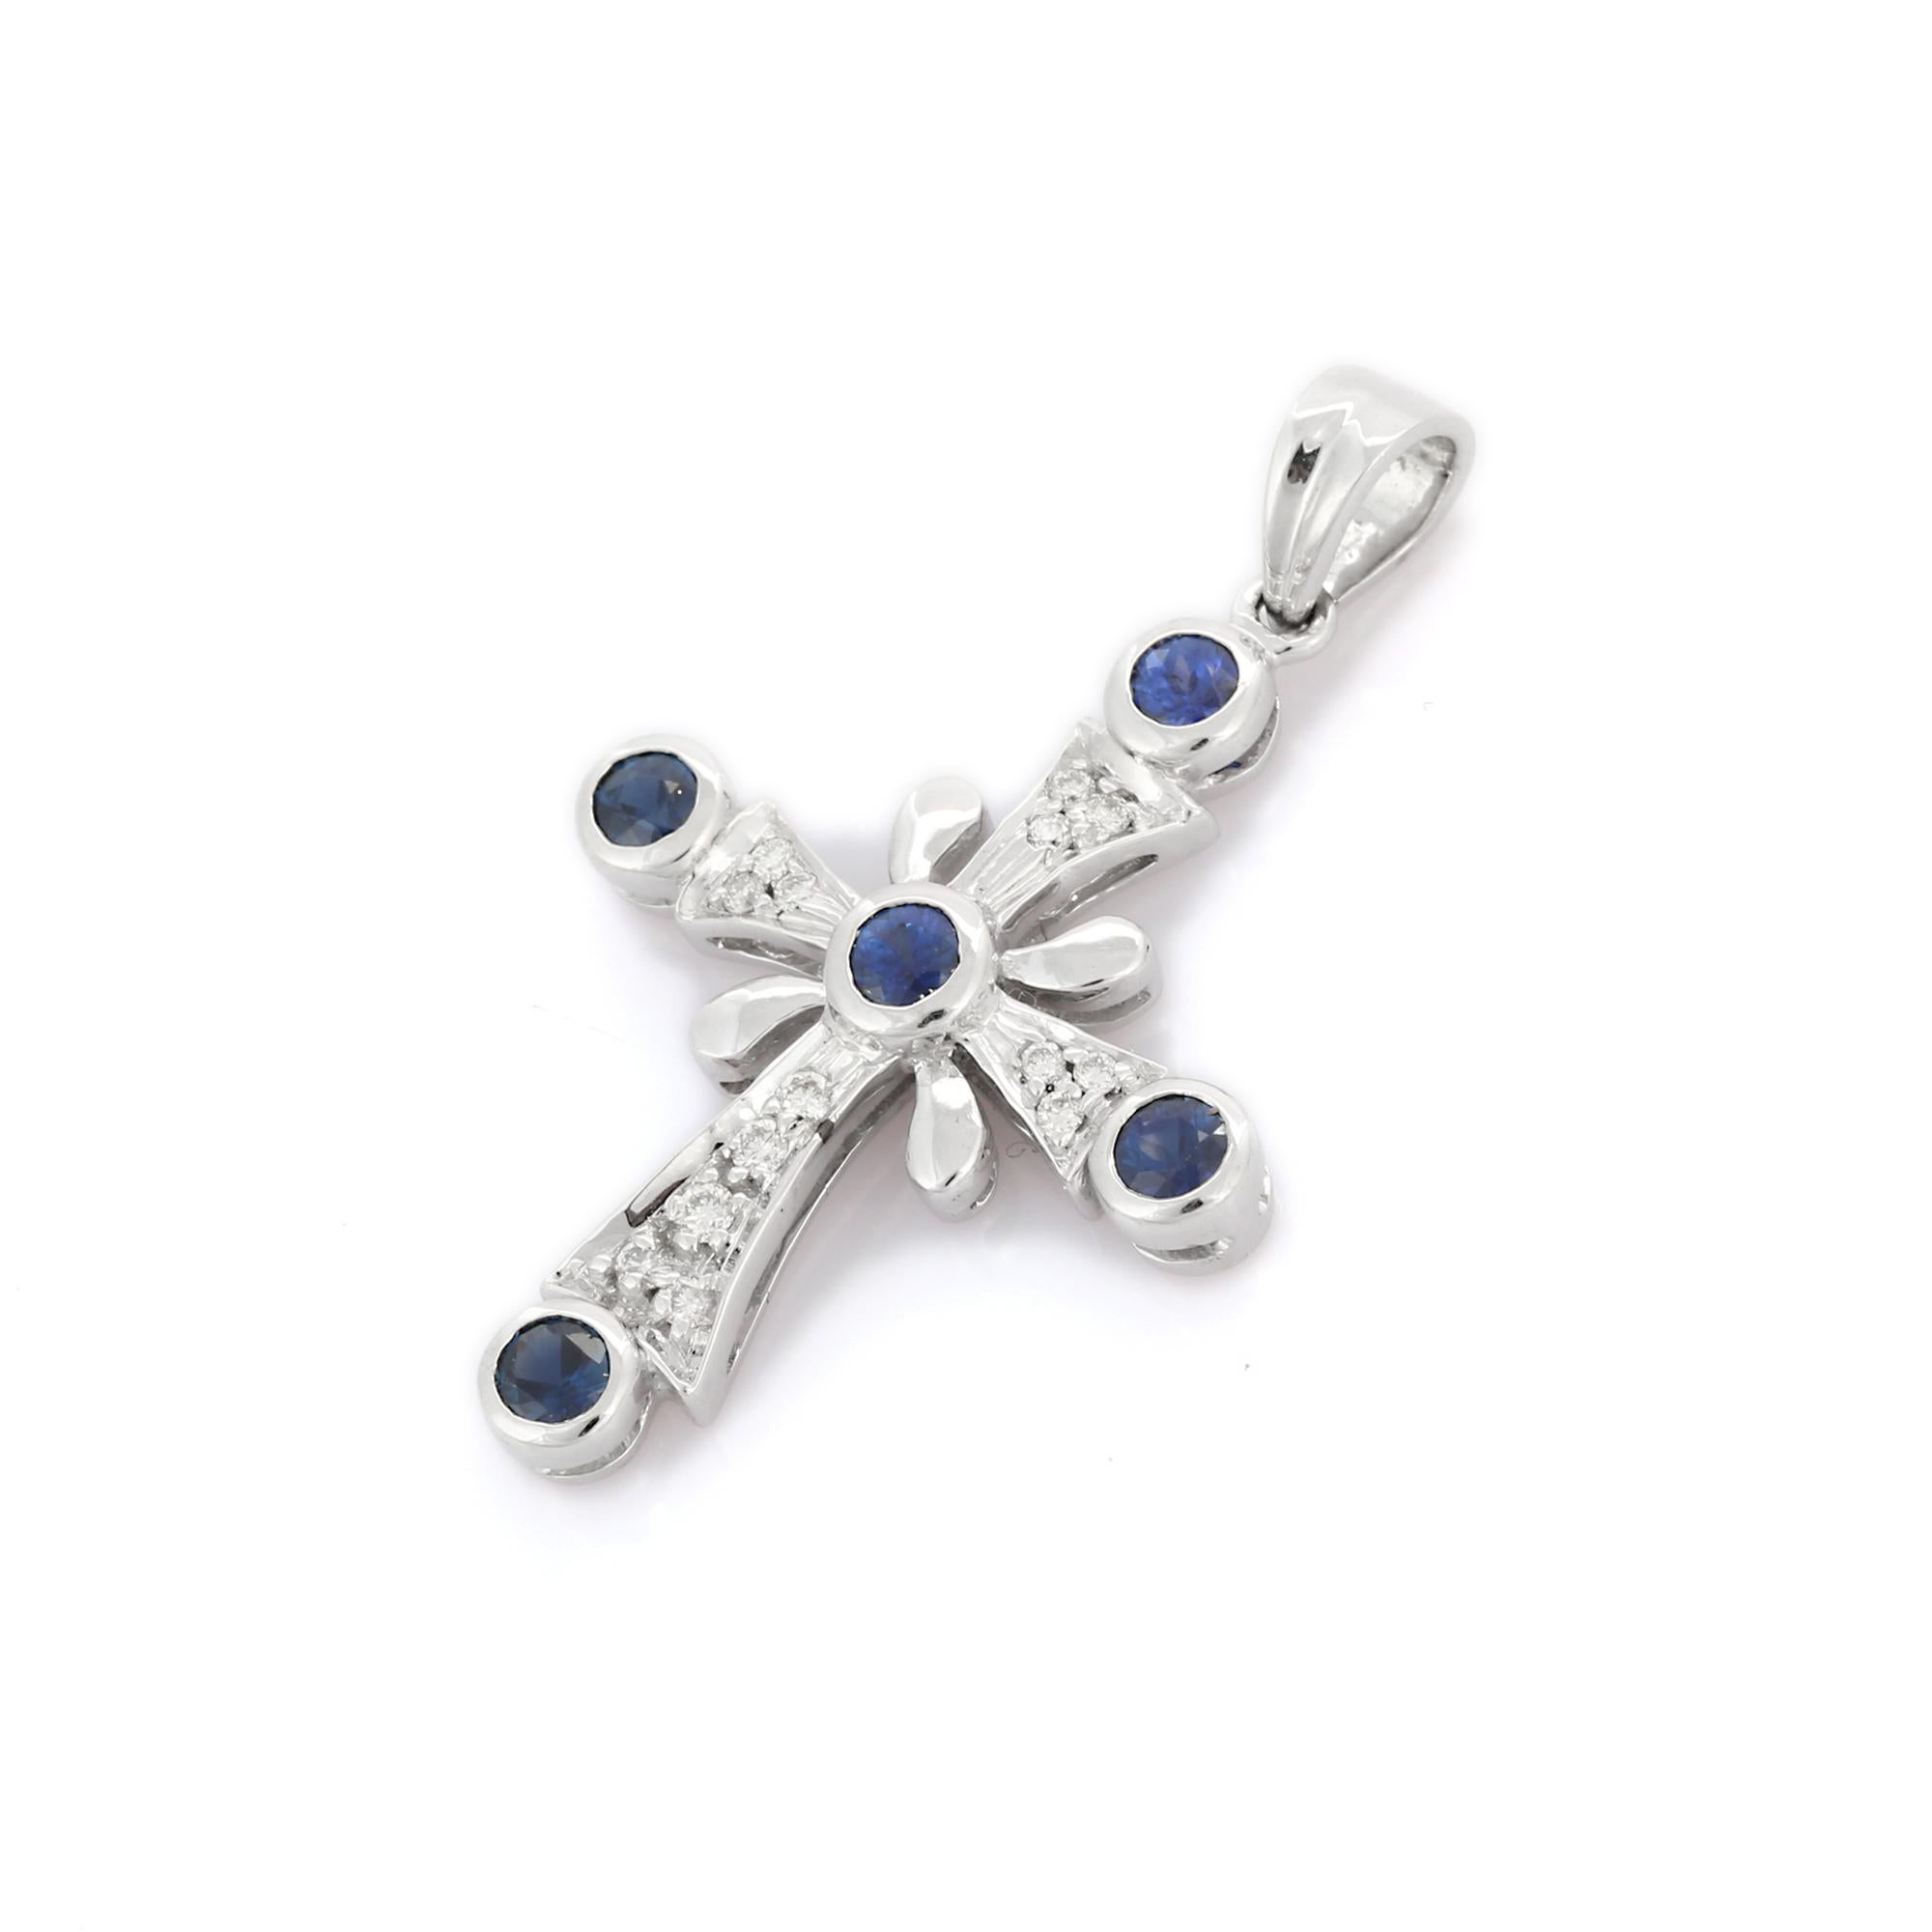 Natural blue sapphire cross pendant in 18K gold. It has square cut sapphires studded with diamonds that completes your look with a decent touch. Pendants are used to wear or gifted to represent love and promises. It's an attractive jewelry piece